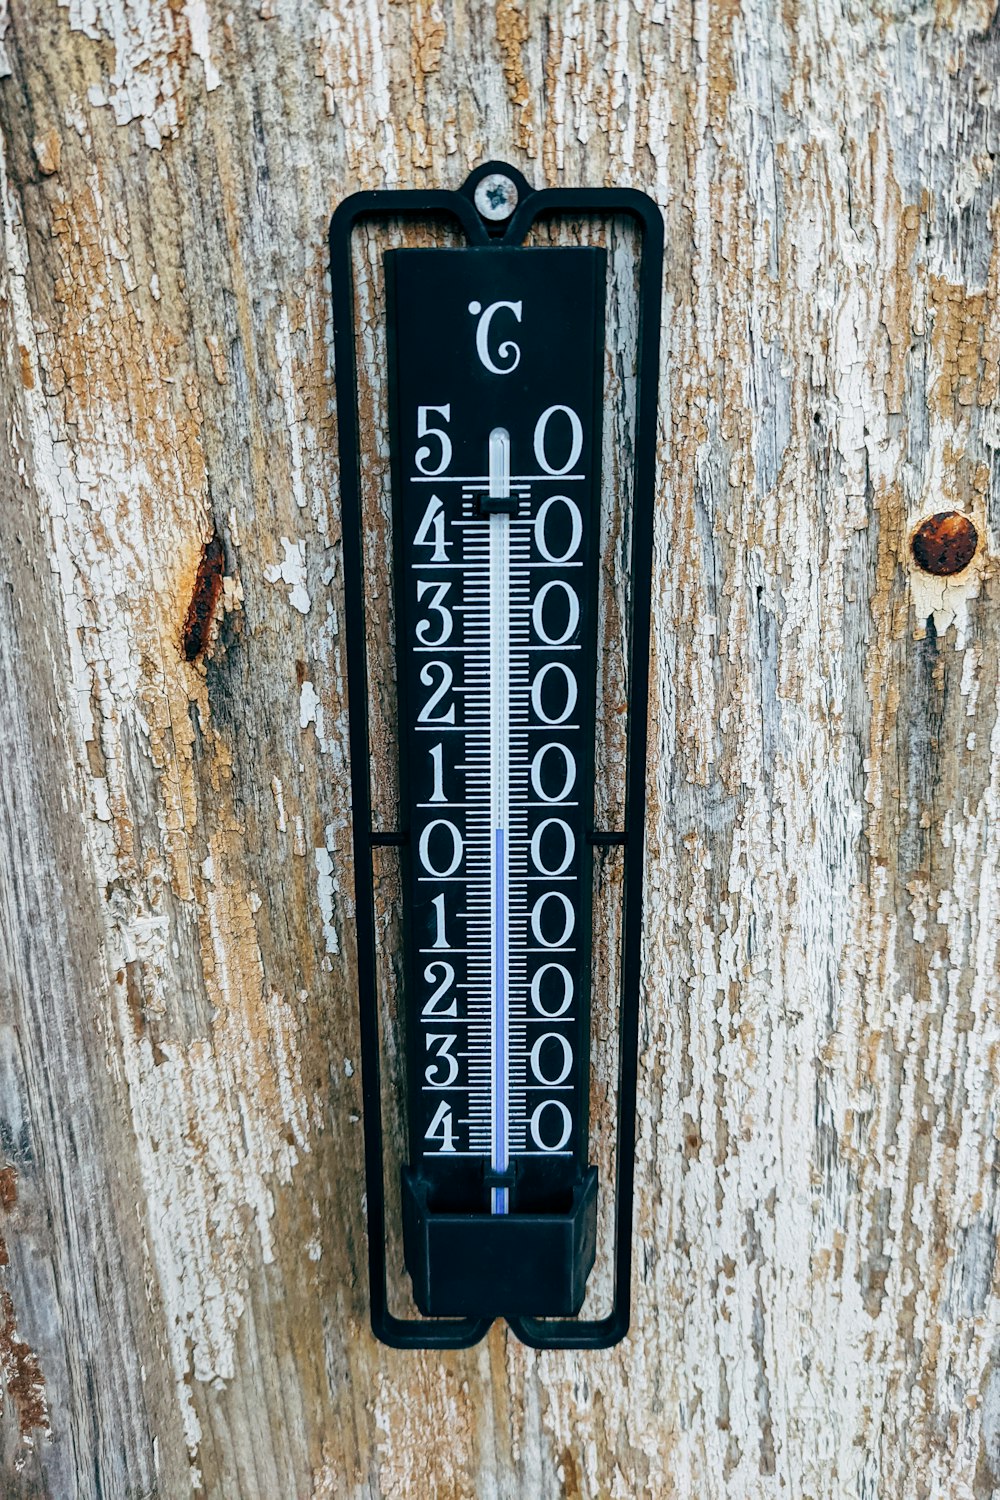 a thermometer mounted to a wooden wall